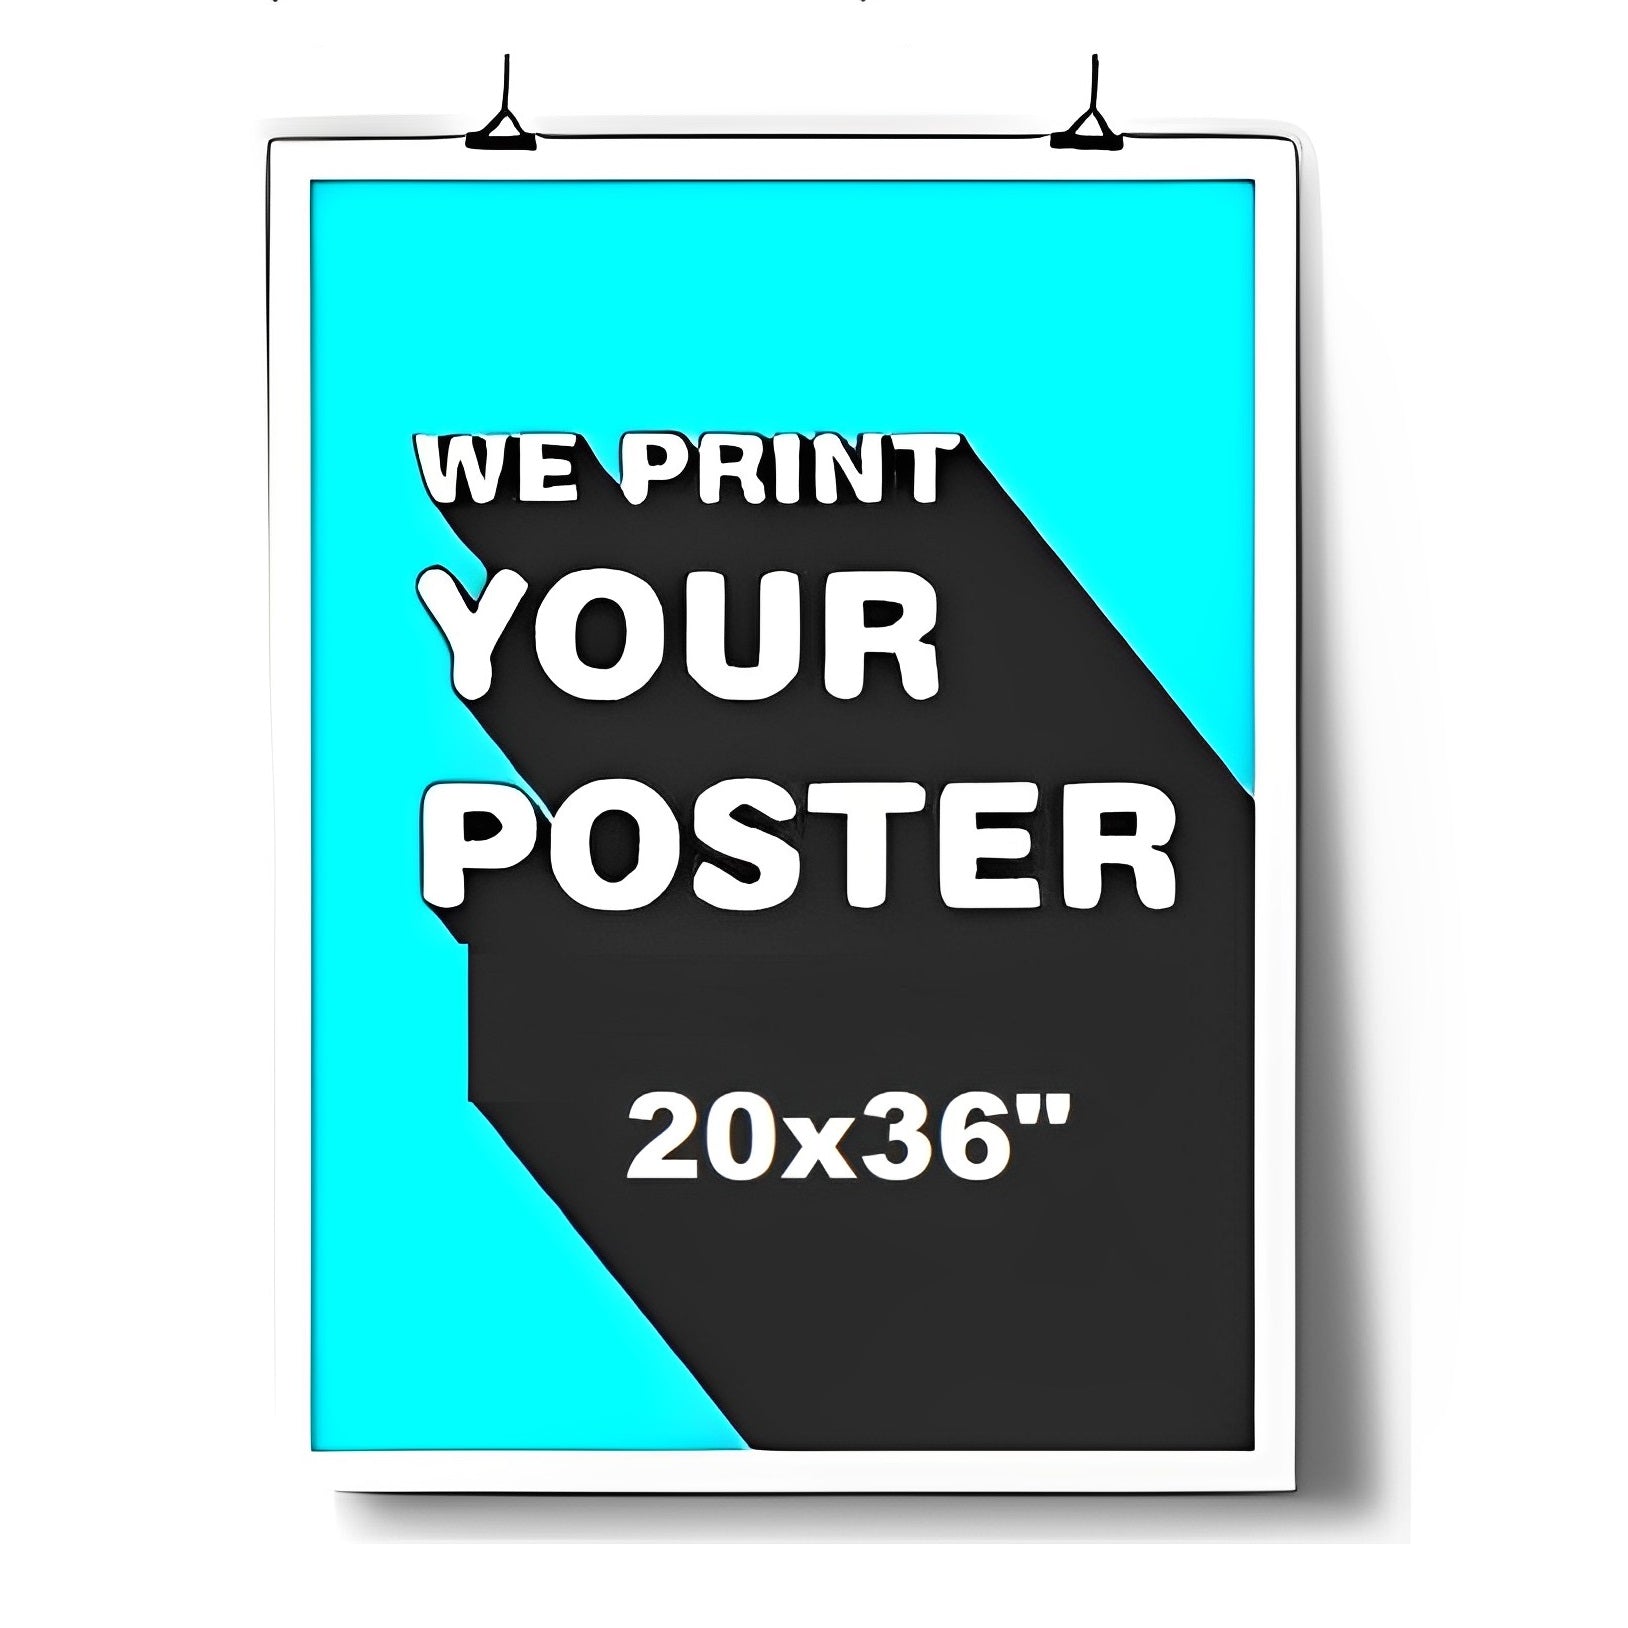 Custom poster 20x36 Photo Print| Custom posters from pictures |Posters Print - Create Your Own Personalized Poster 20 x 36